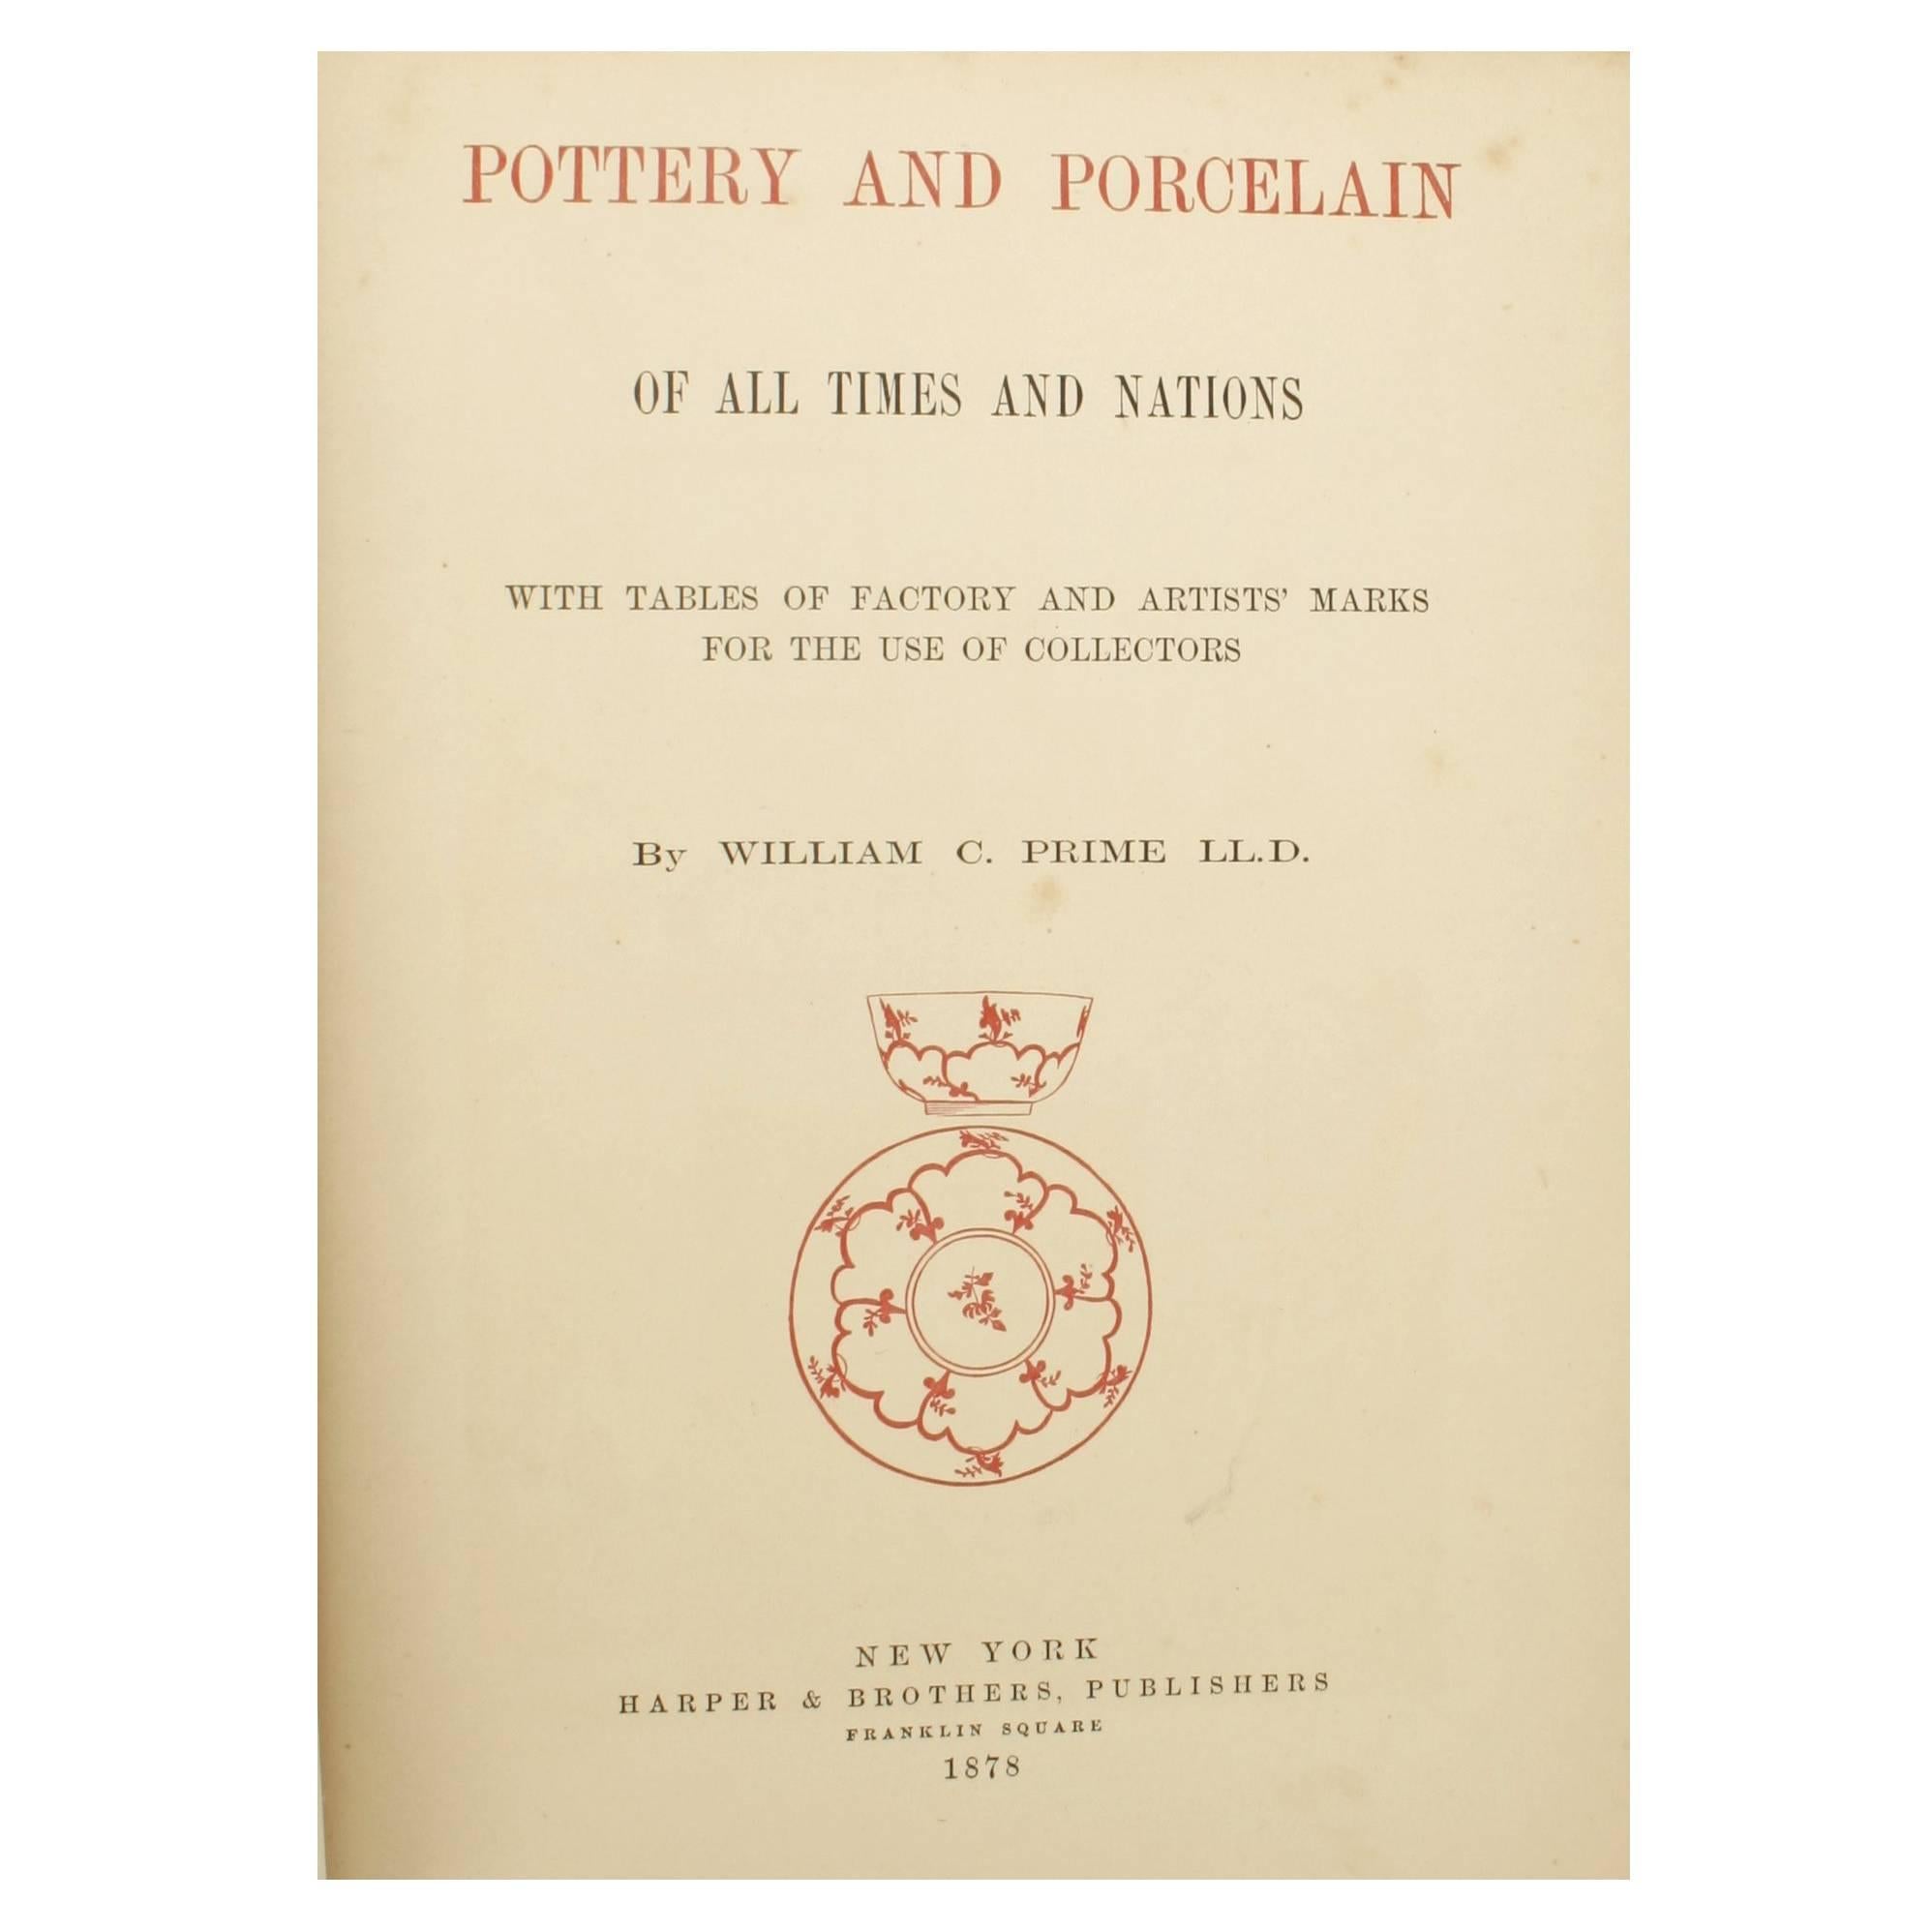 Pottery and porcelain of All Times and Nations by Wm. Prime. NY: Harper and Bro., 1878. First edition hardcover. One of the first references on pottery and porcelain collecting. What to collect and why, how to collect and classify, are questions